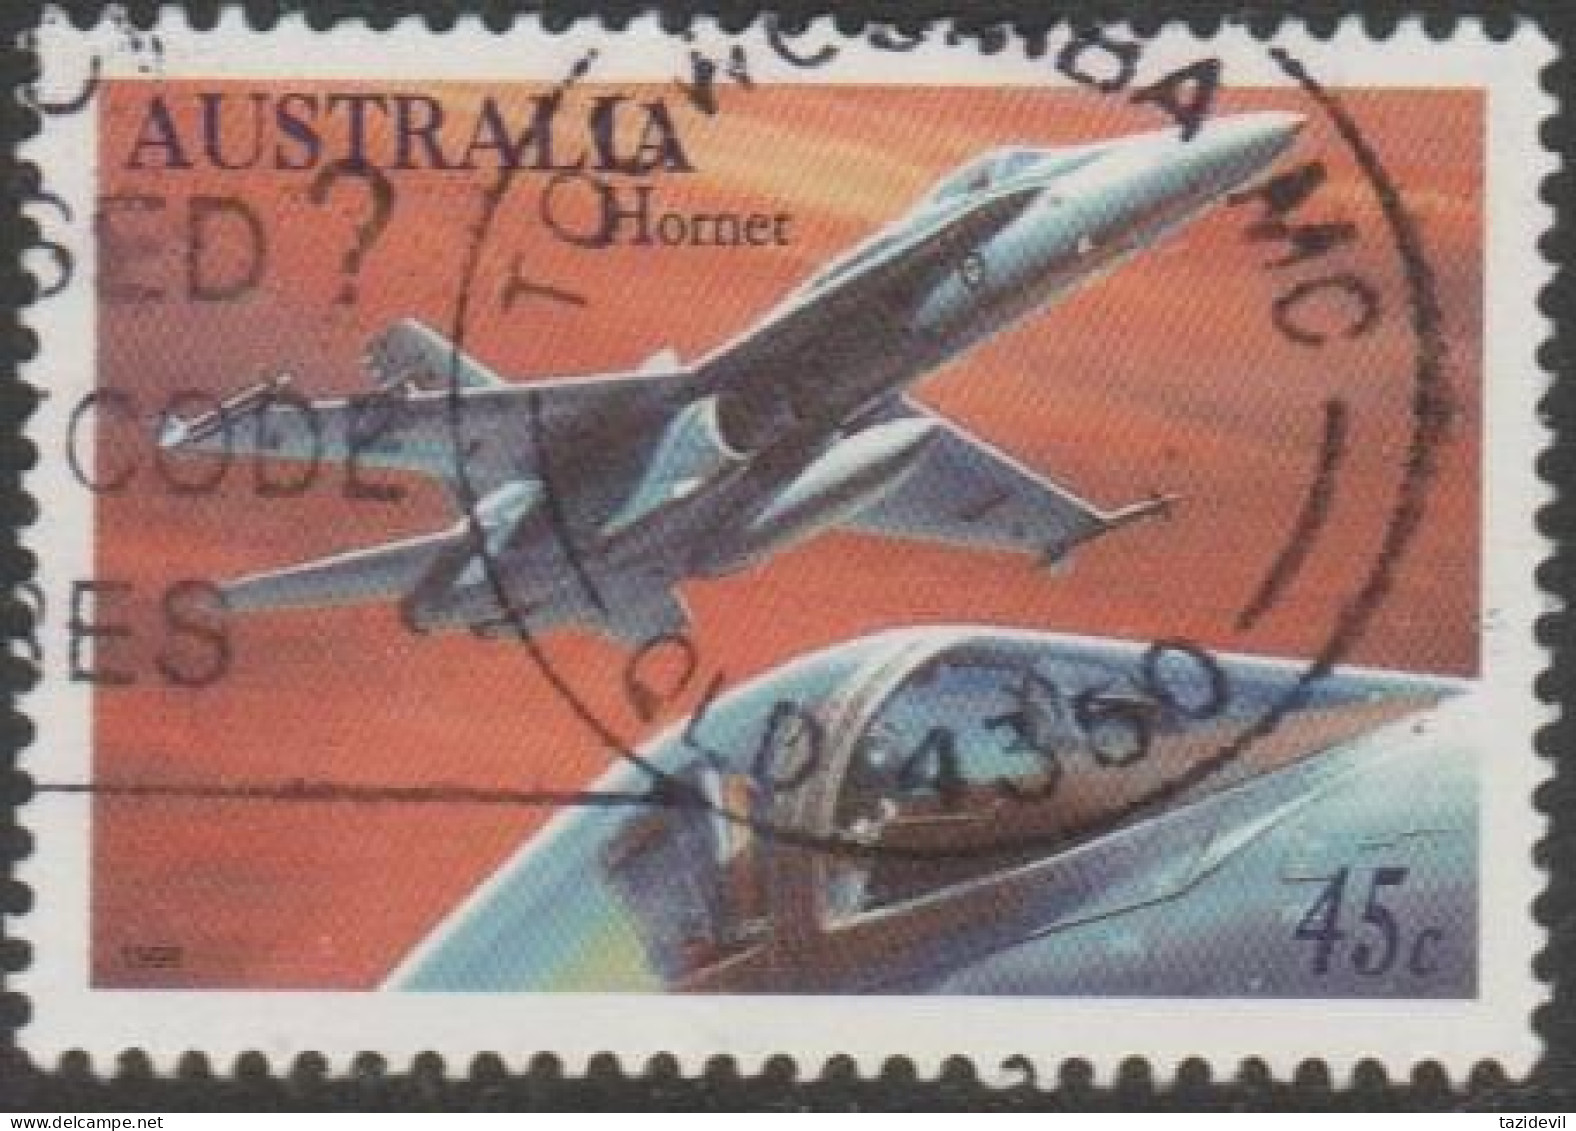 AUSTRALIA - USED 1996 45c Military Aircraft - Hornet - Used Stamps